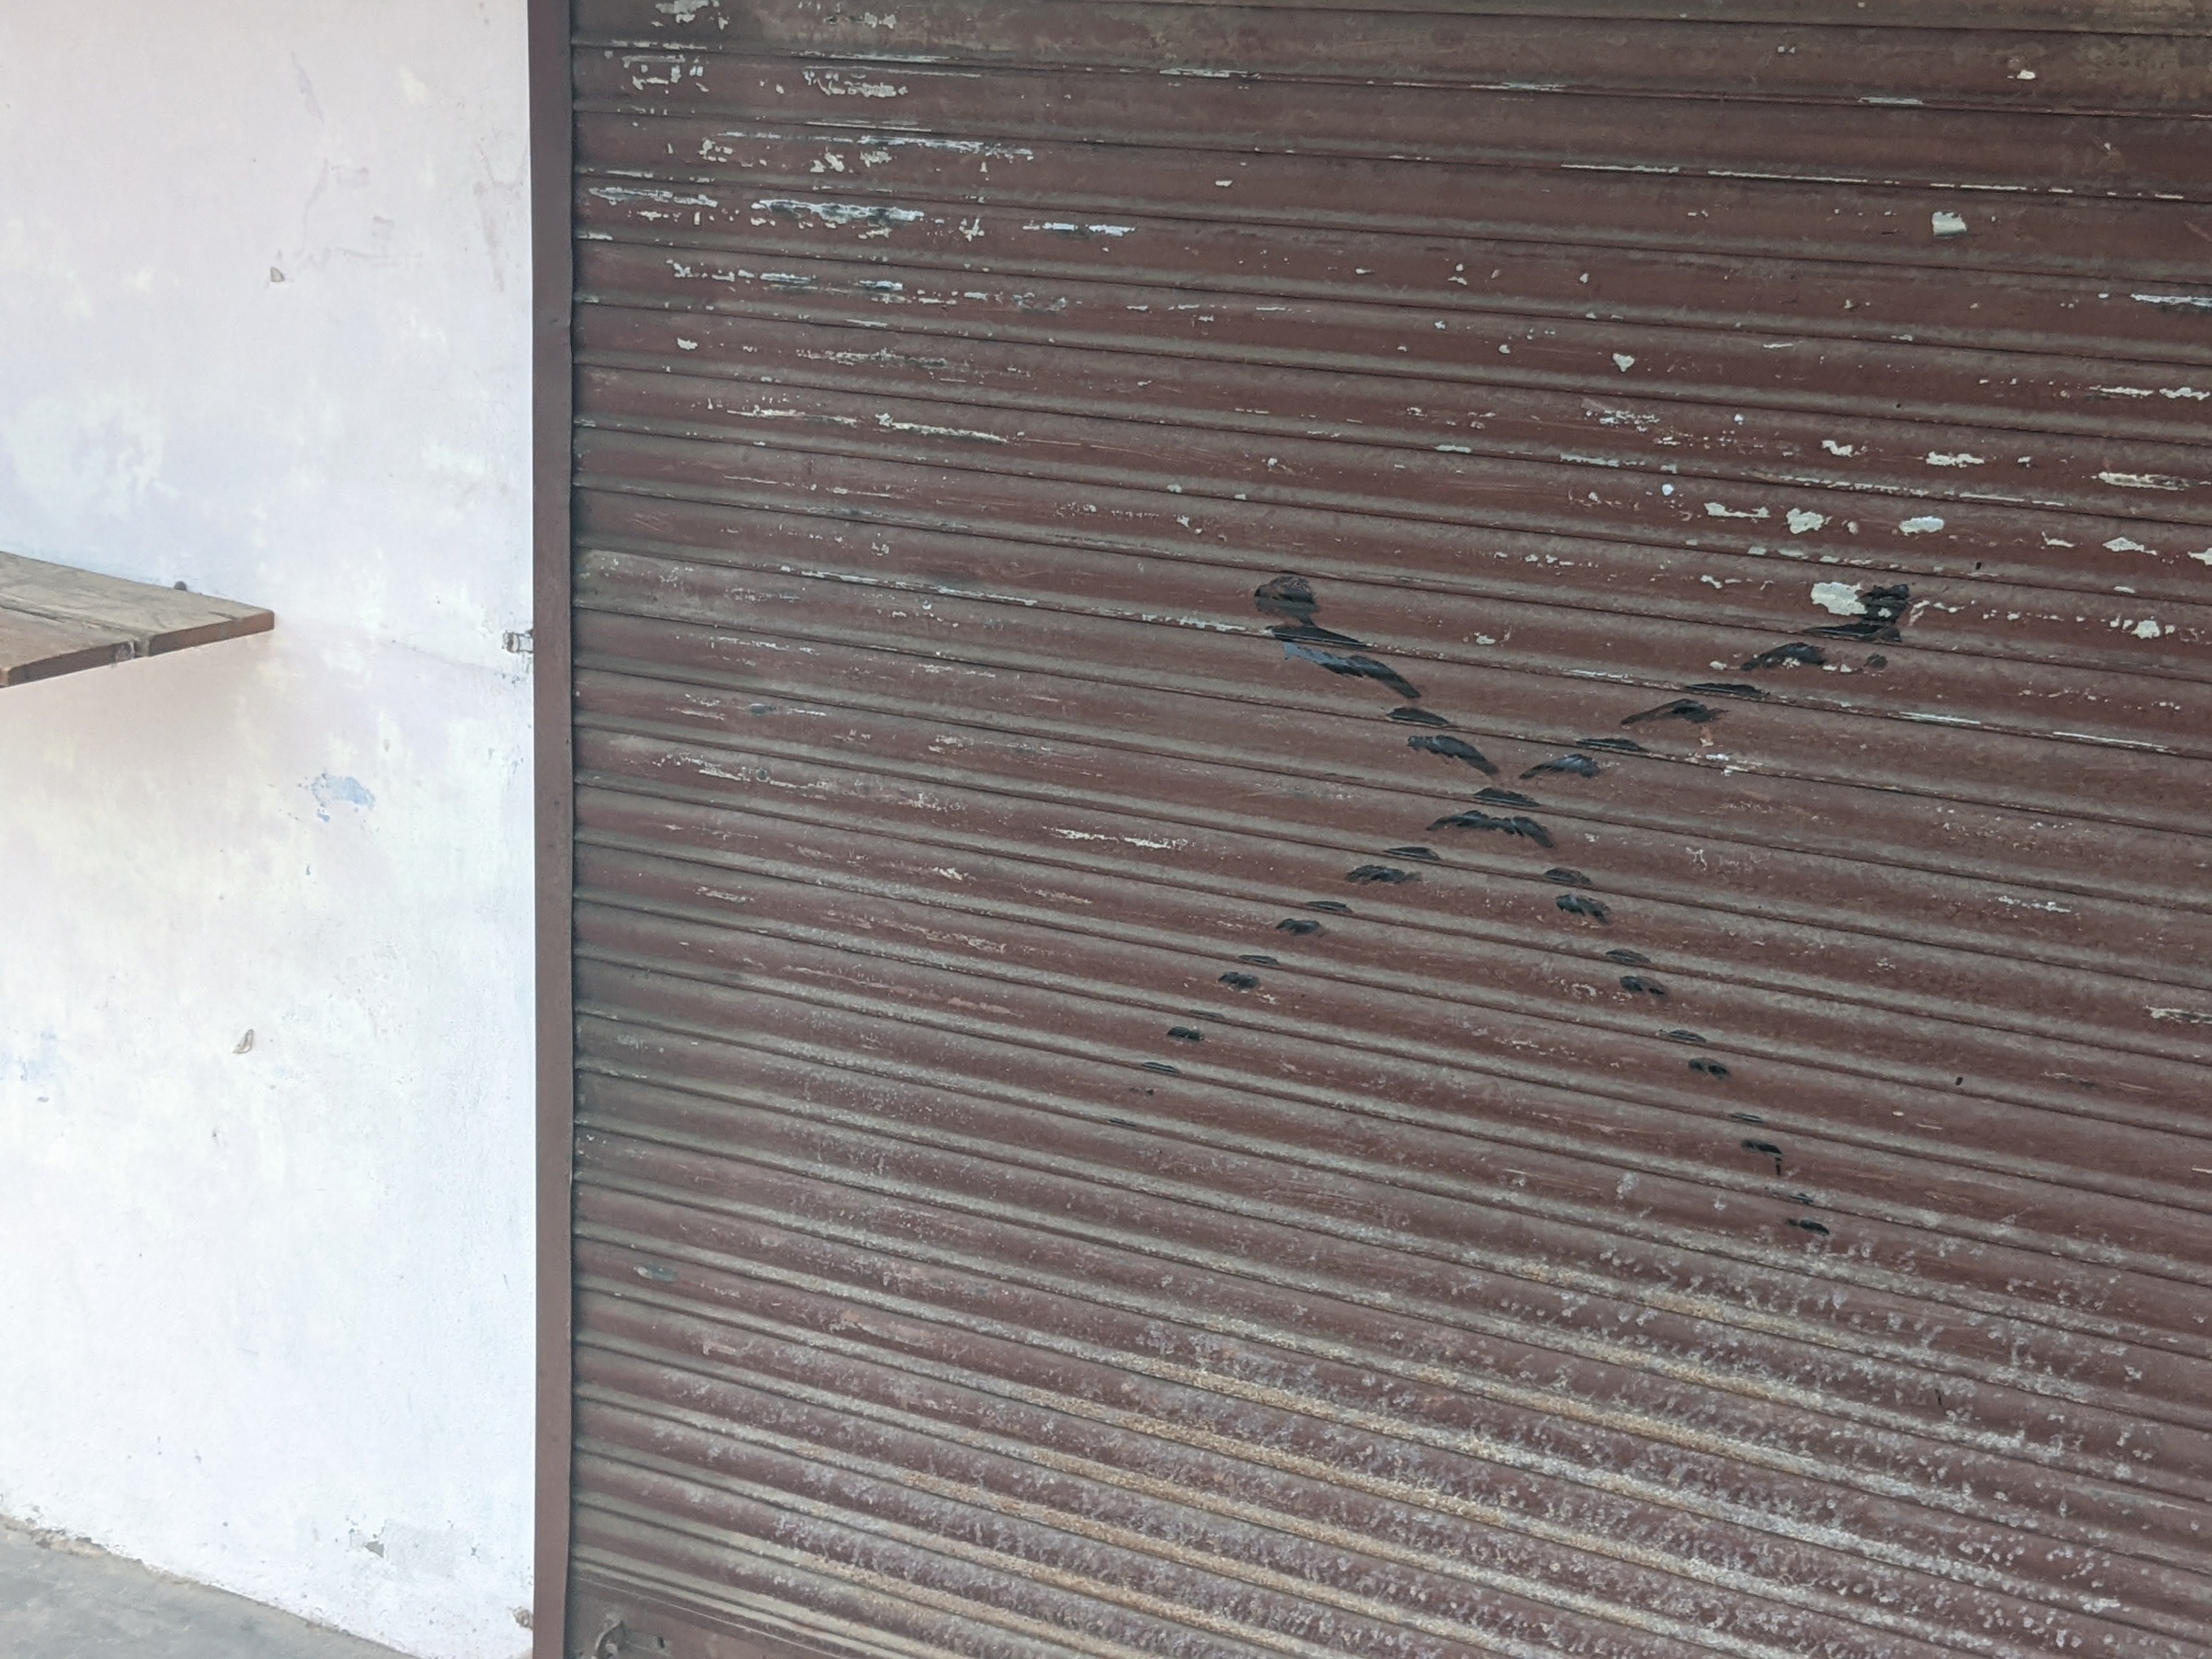 A Muslim-owned shop marked with a black cross in Barkot